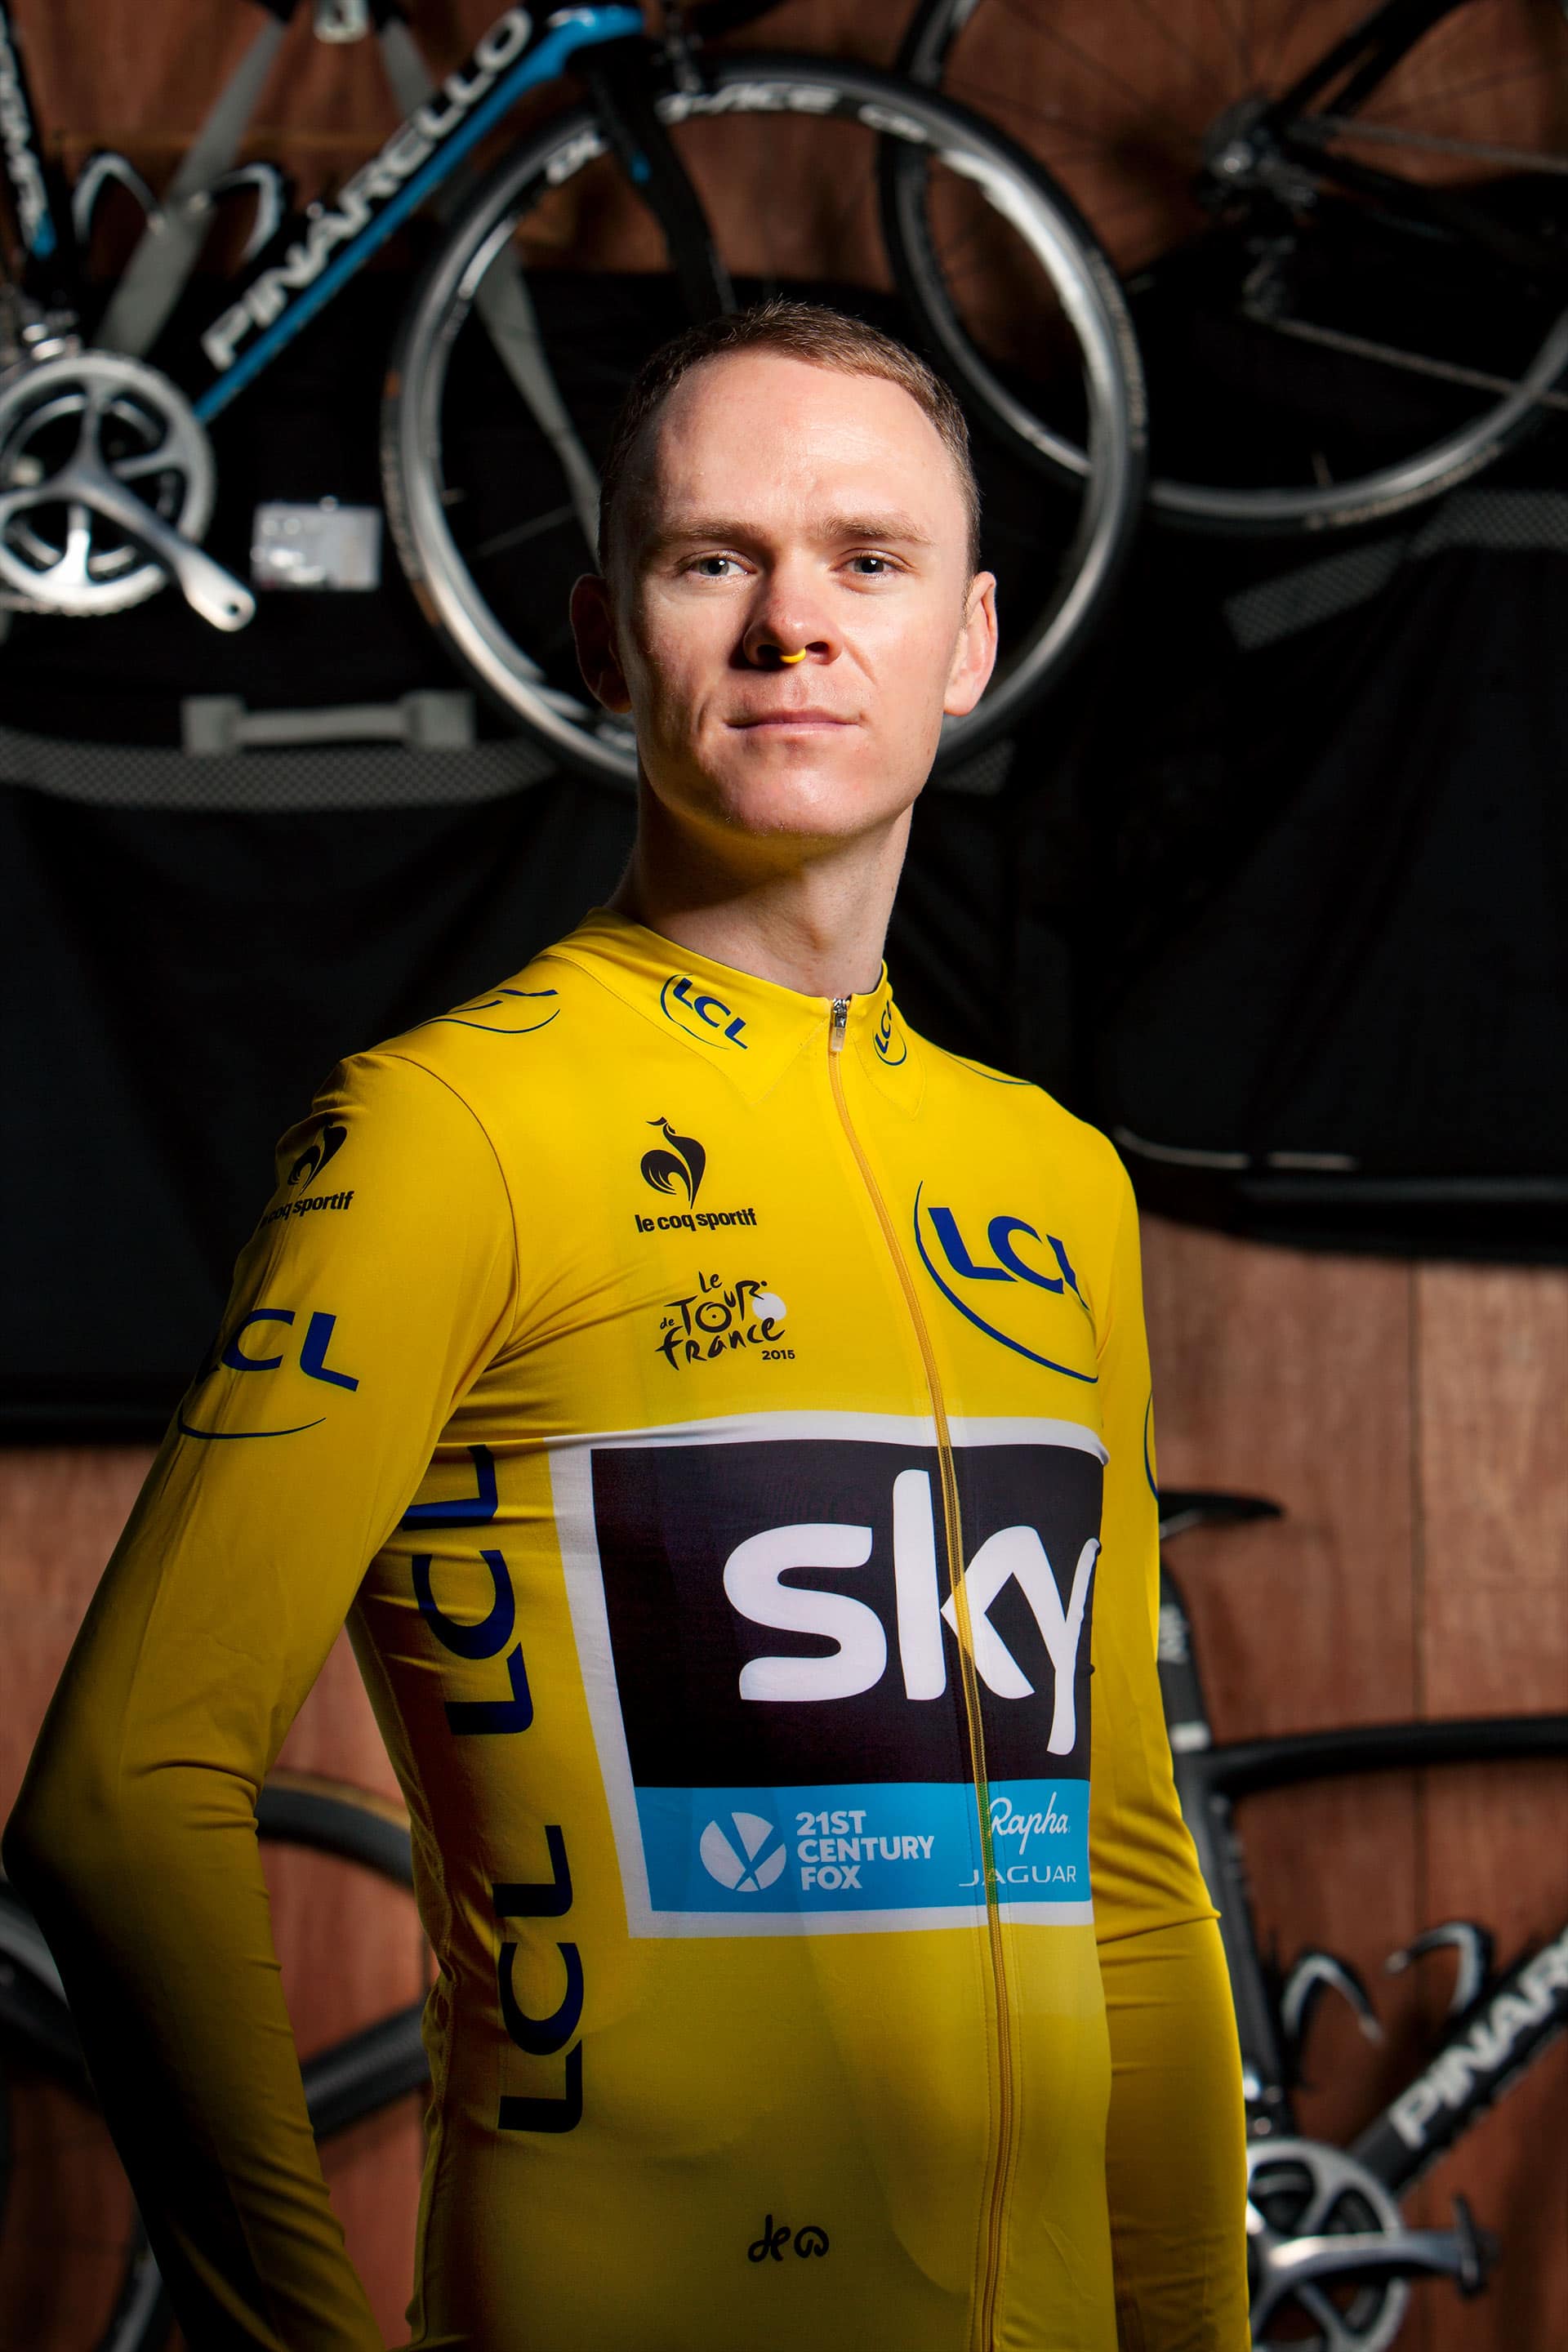 Cyclist in yellow jersey stands in front of bicycles on the wall